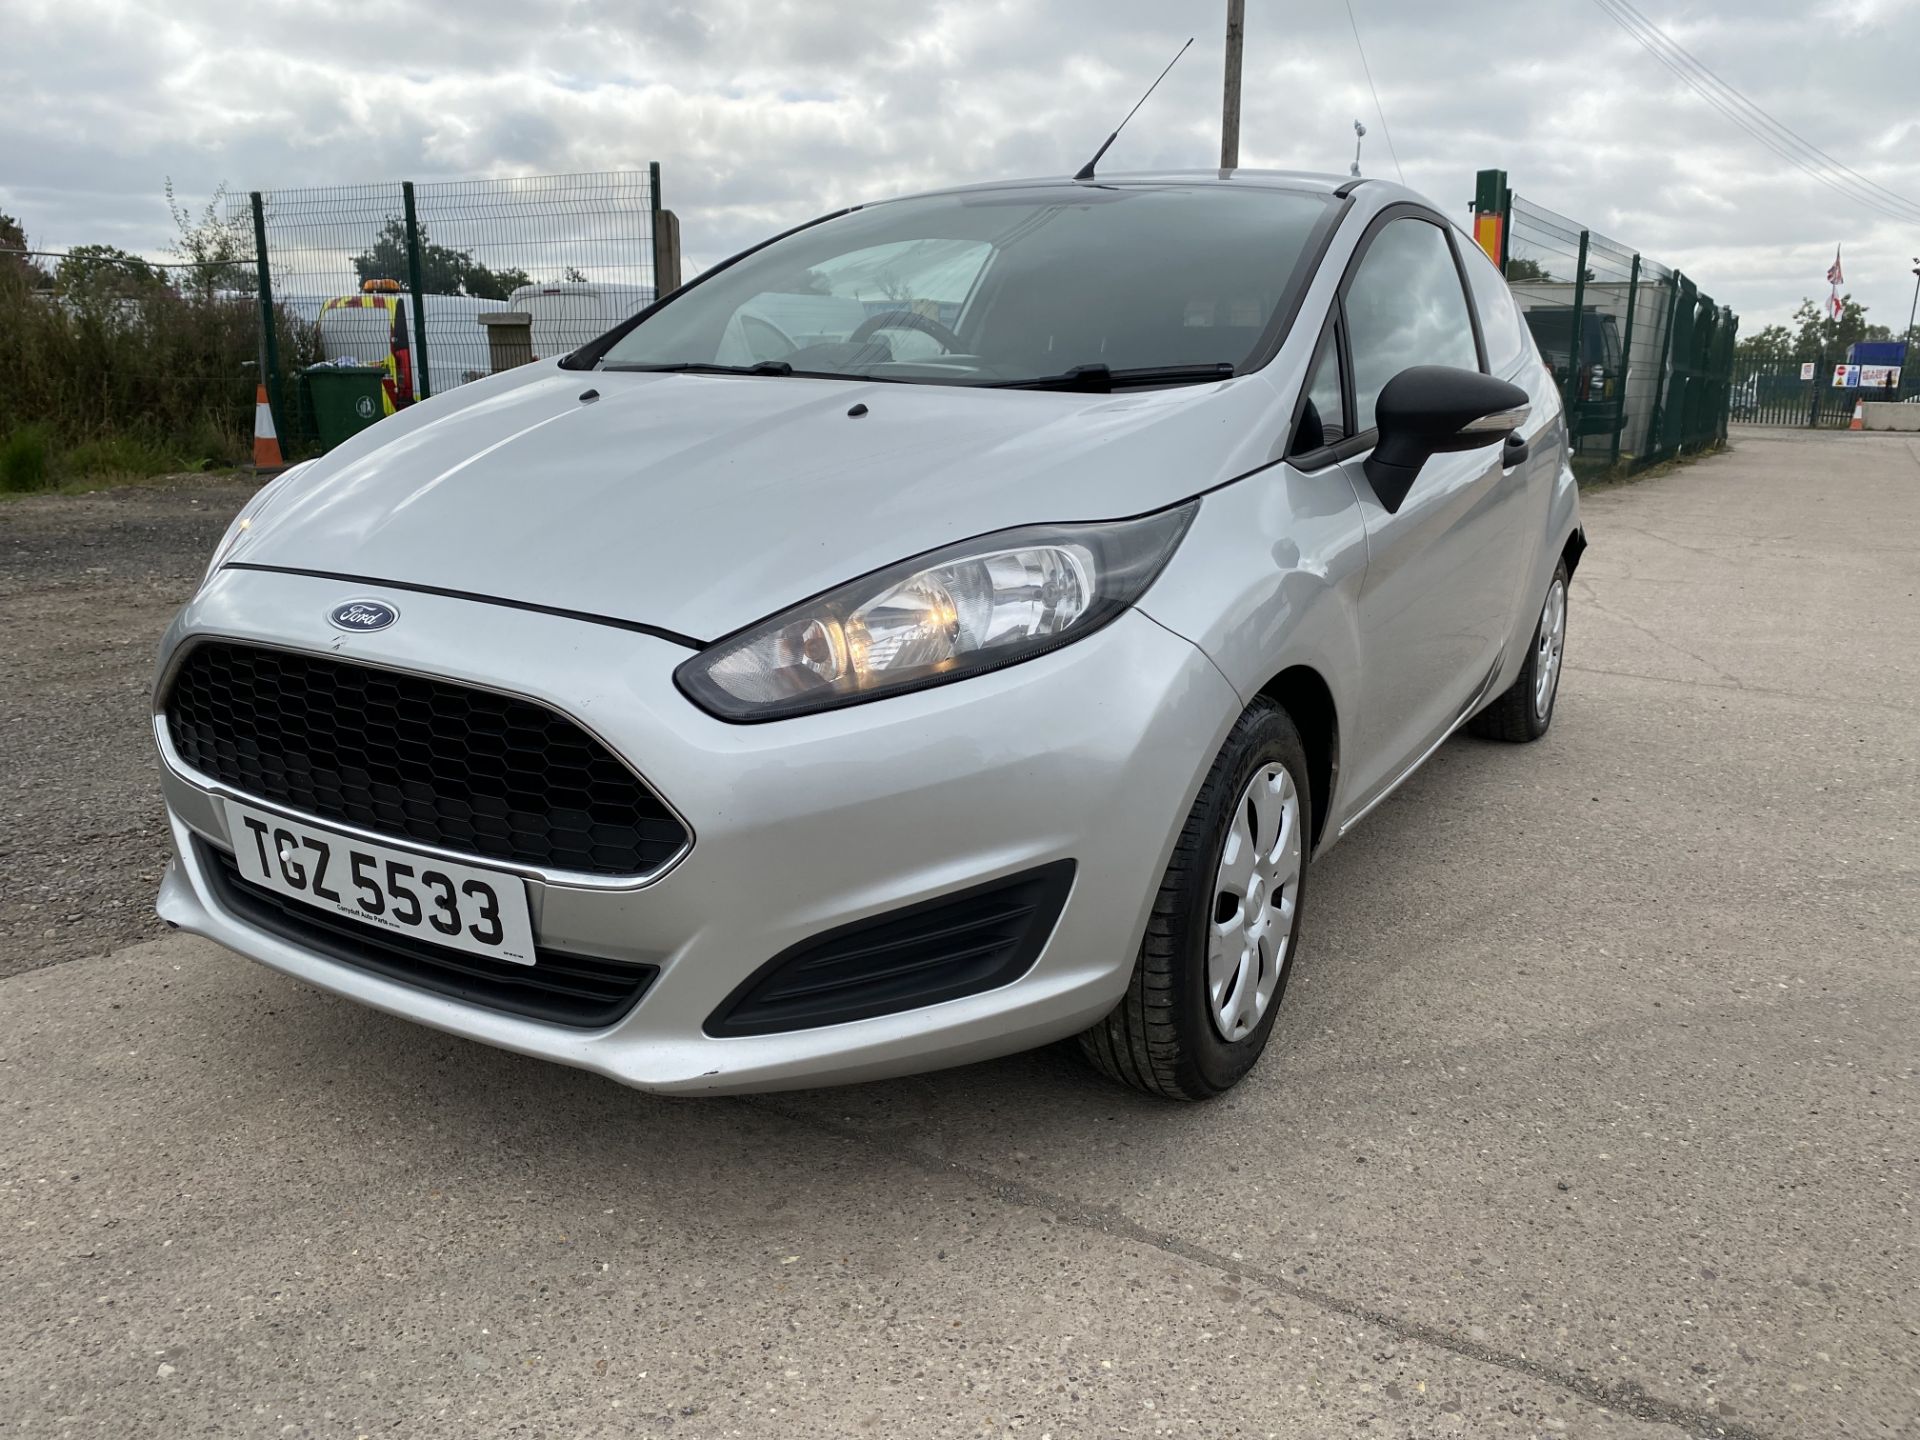 (On Sale) FORD FIESTA 1.5'TDCI' ECONETIC - (66 REG) 1 OWNER - AIR CON - SILVER -NEW SHAPE - LOOK!!!! - Image 4 of 20